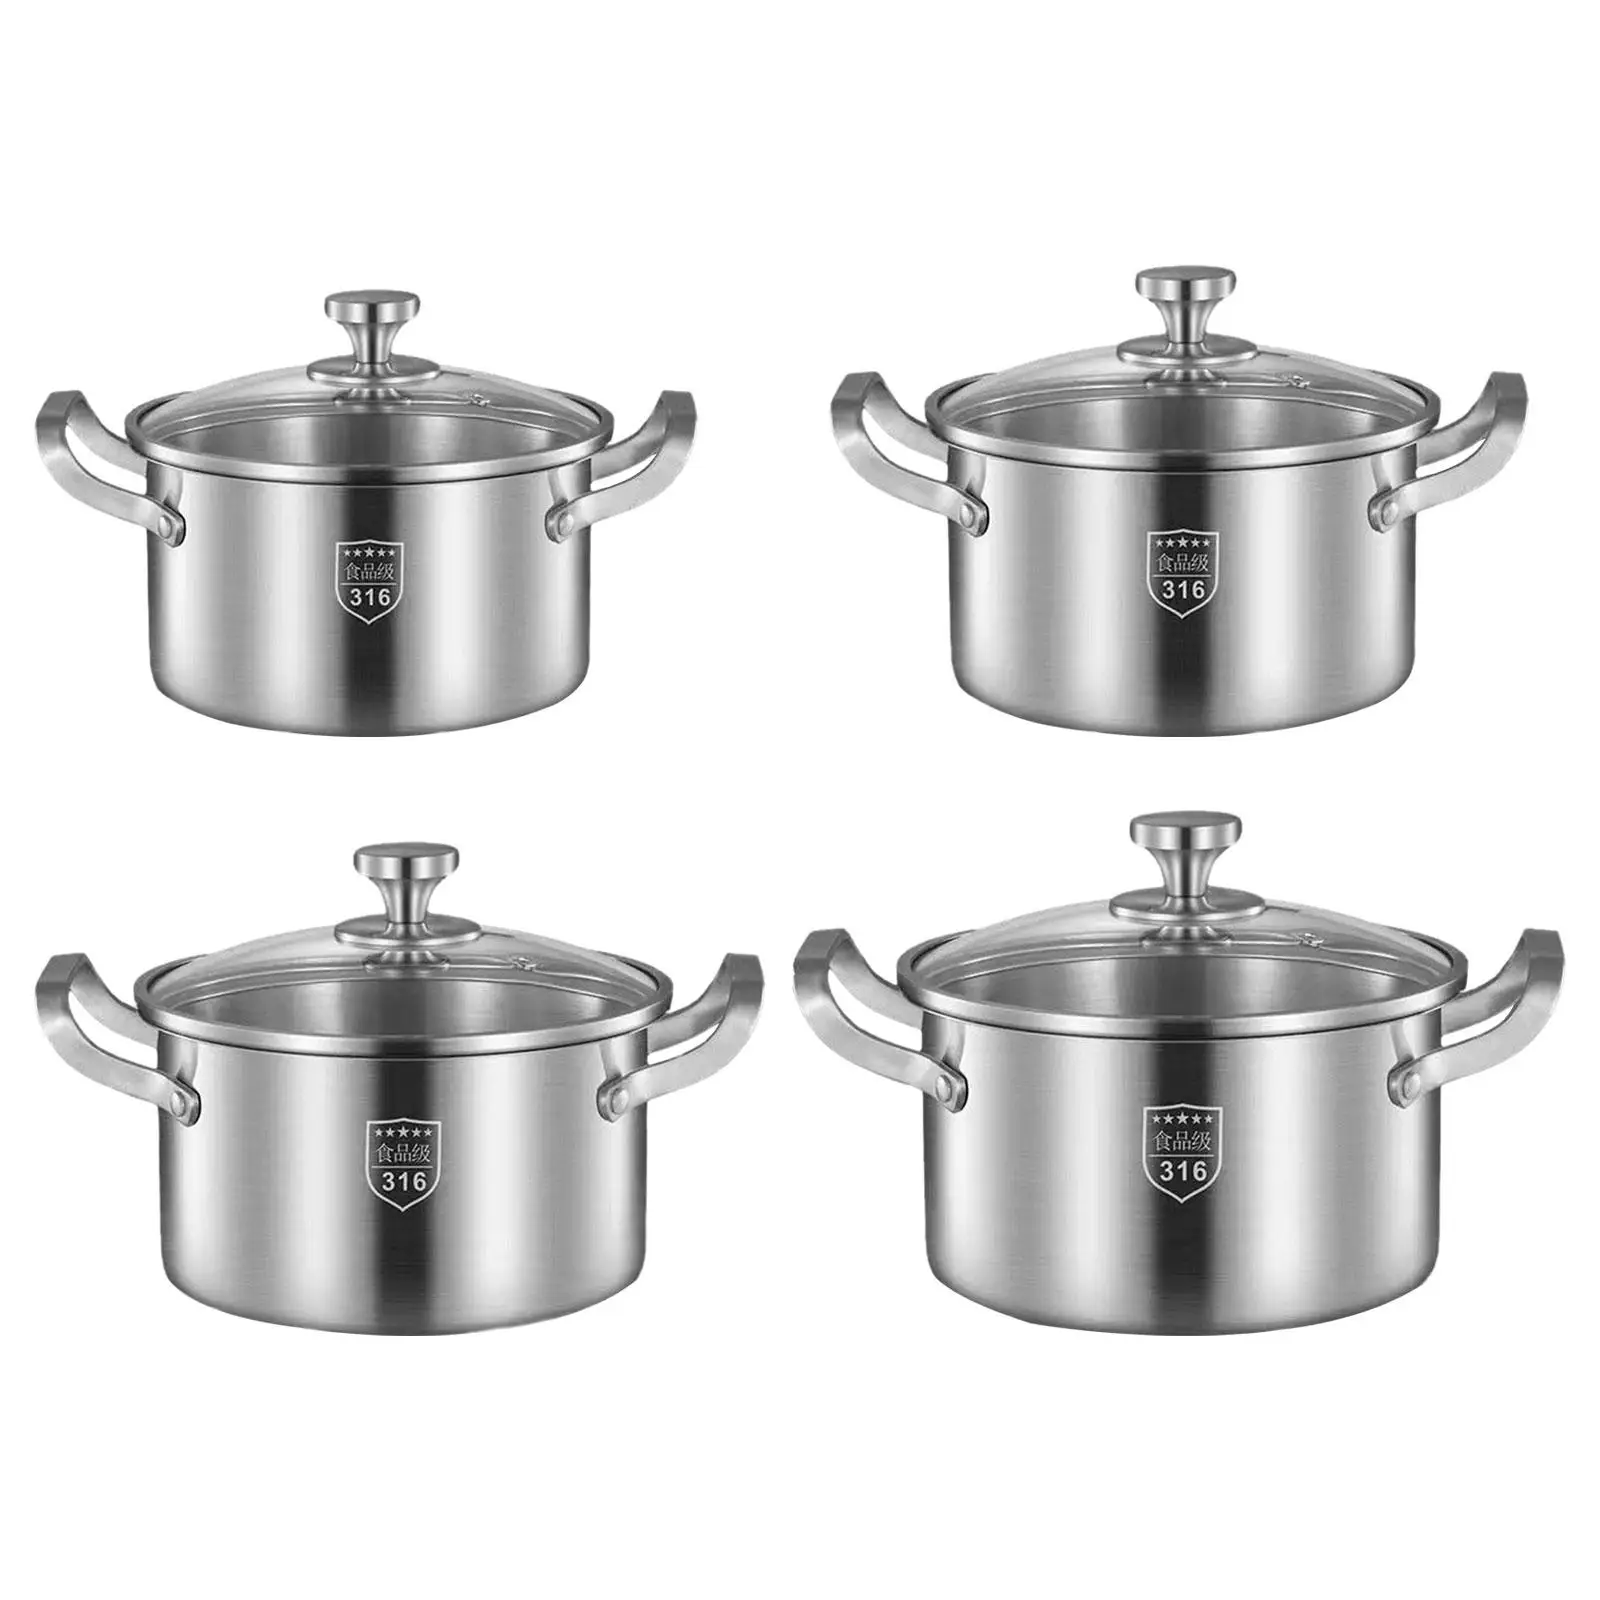 Soup Pot Cookware Portable Works Nonstick Pan Cooking Tools Stockpot with Lid Kitchen Pot for Home Bar Restaurant Kitchen